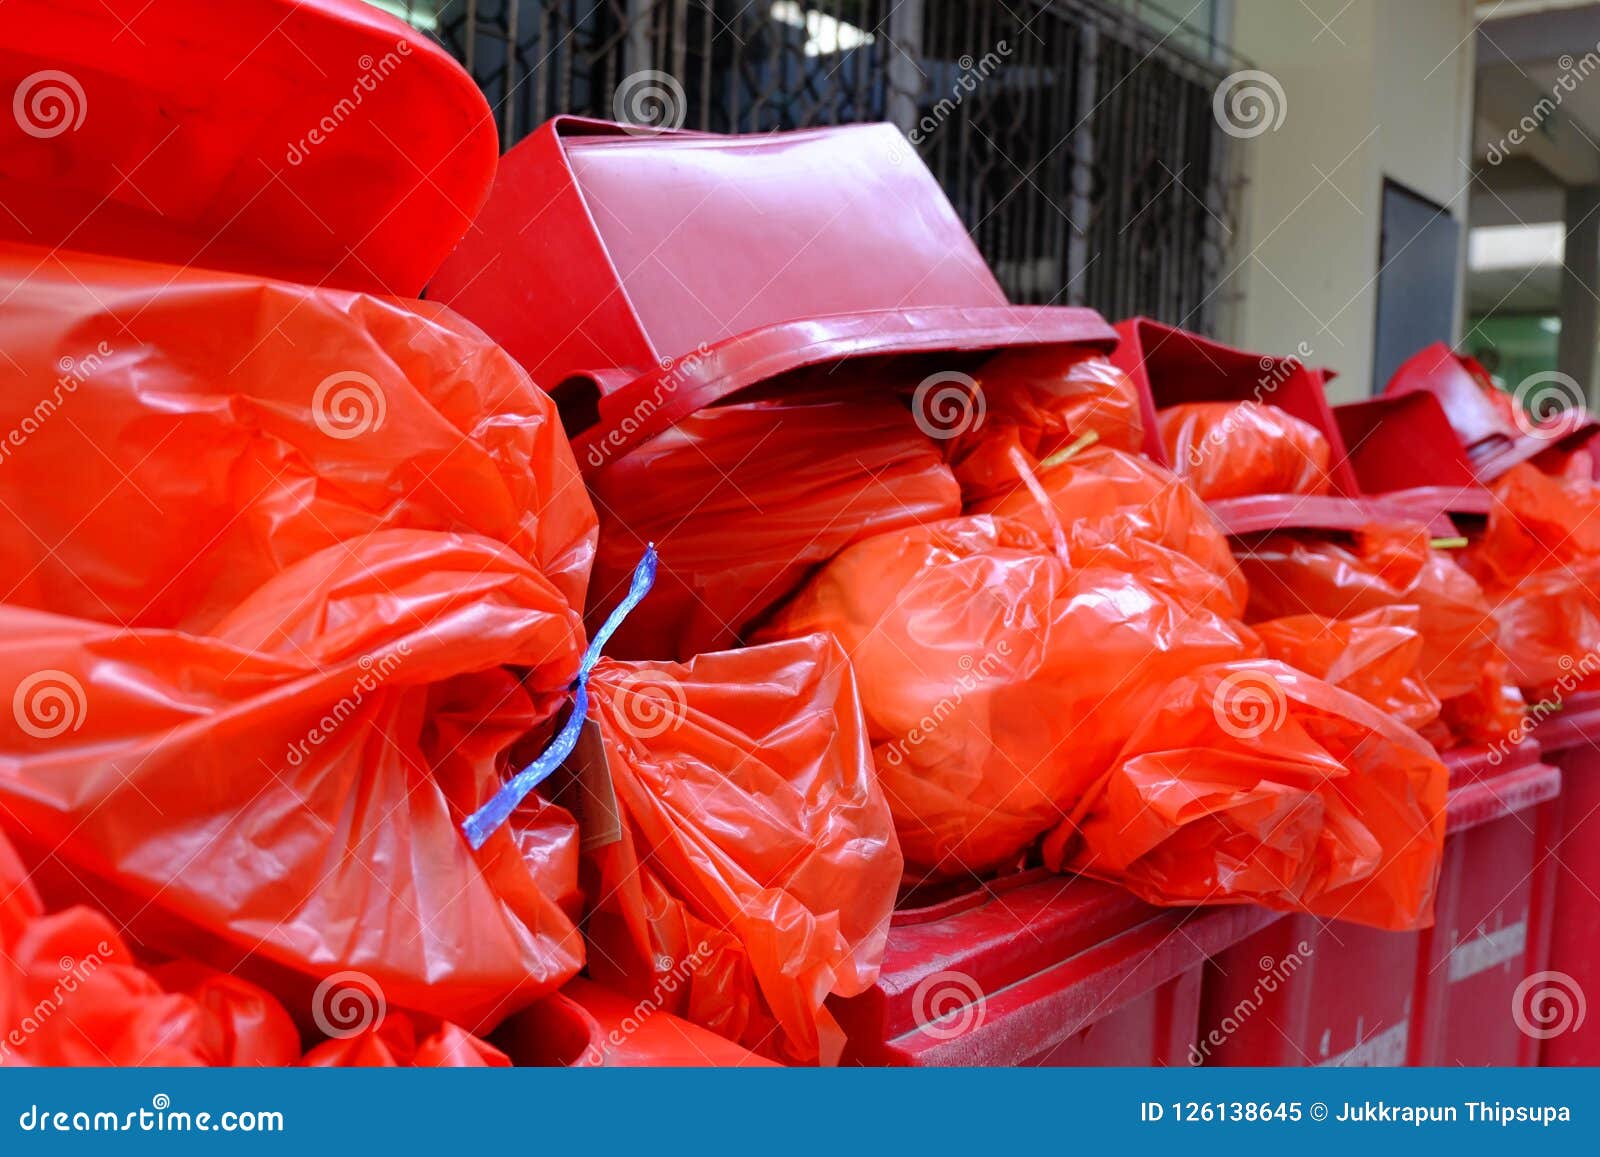 Chiang Rai, Thailand - September 6, 2018:Infected Garbage Bag,Red